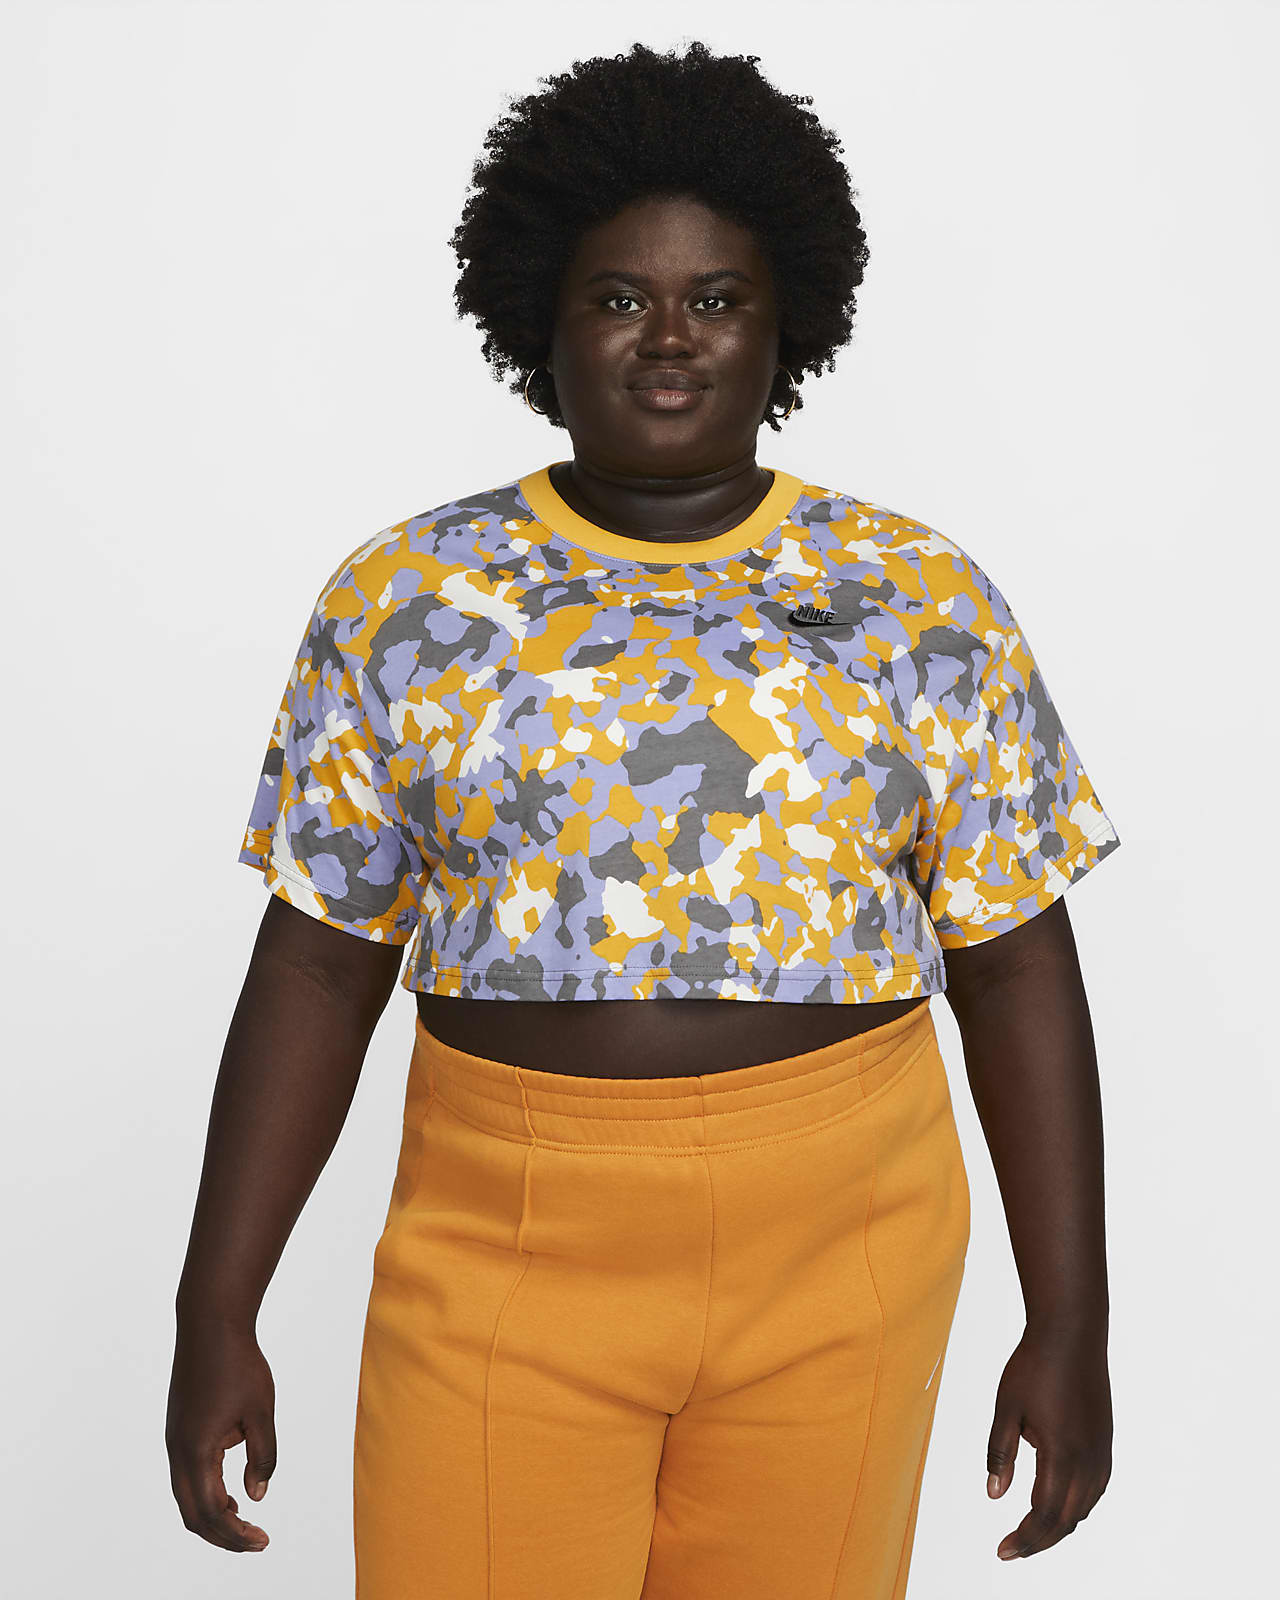 Shop the New Nike Plus Size Activewear Collection